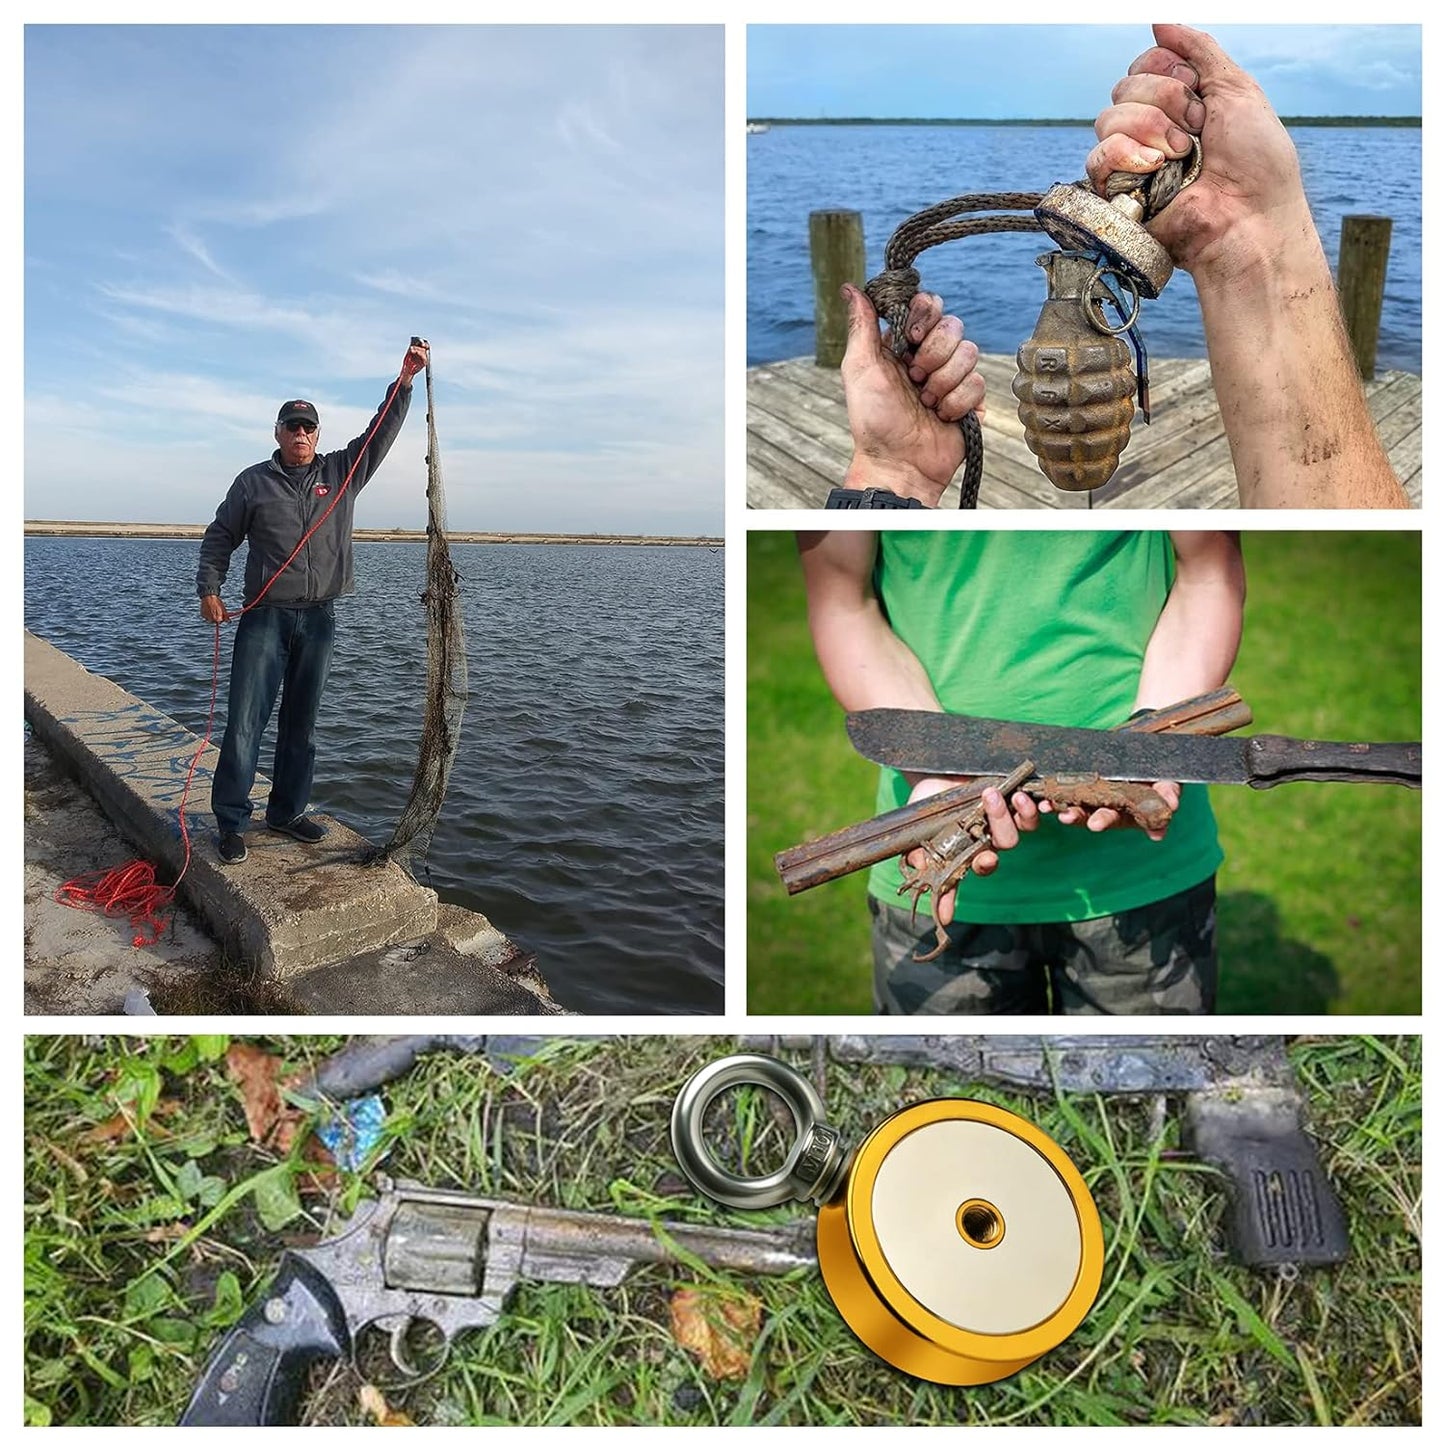 Magnets Fishing Kit Fishing Kit for Magnetic Fishing and Retrieving Items in River, Lake